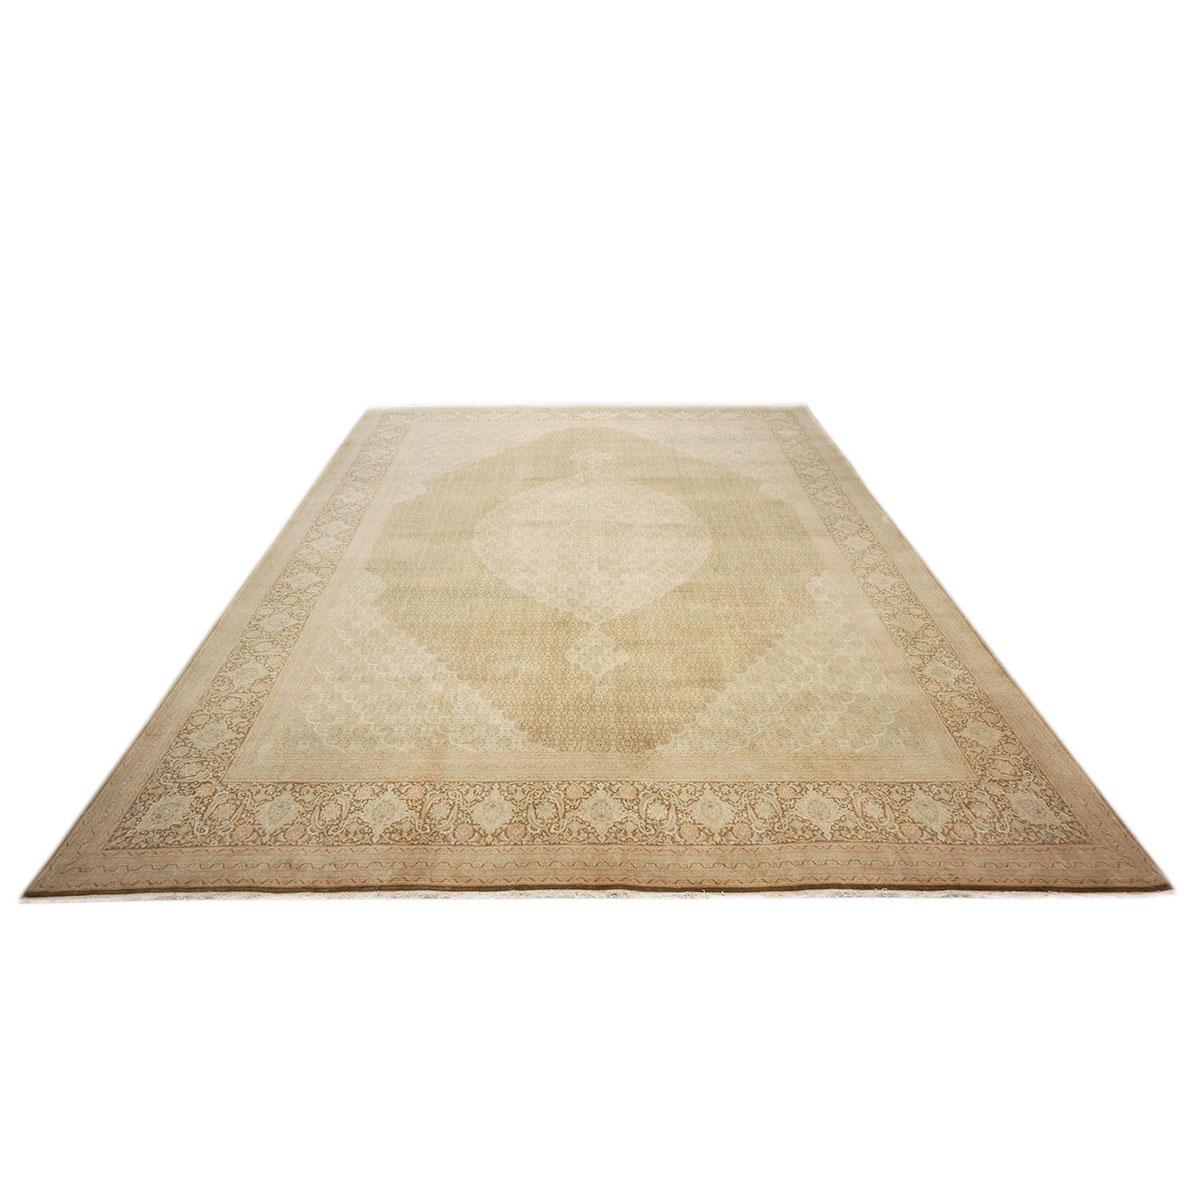 Ashly Fine Rugs presents a 1940s Antique Persian Tabriz Wool Handmade Rug. Tabriz is a northern city in modern-day Iran and has forever been famous for the fineness and craftsmanship of its handmade rugs. These rugs are better known as the Pahlavi